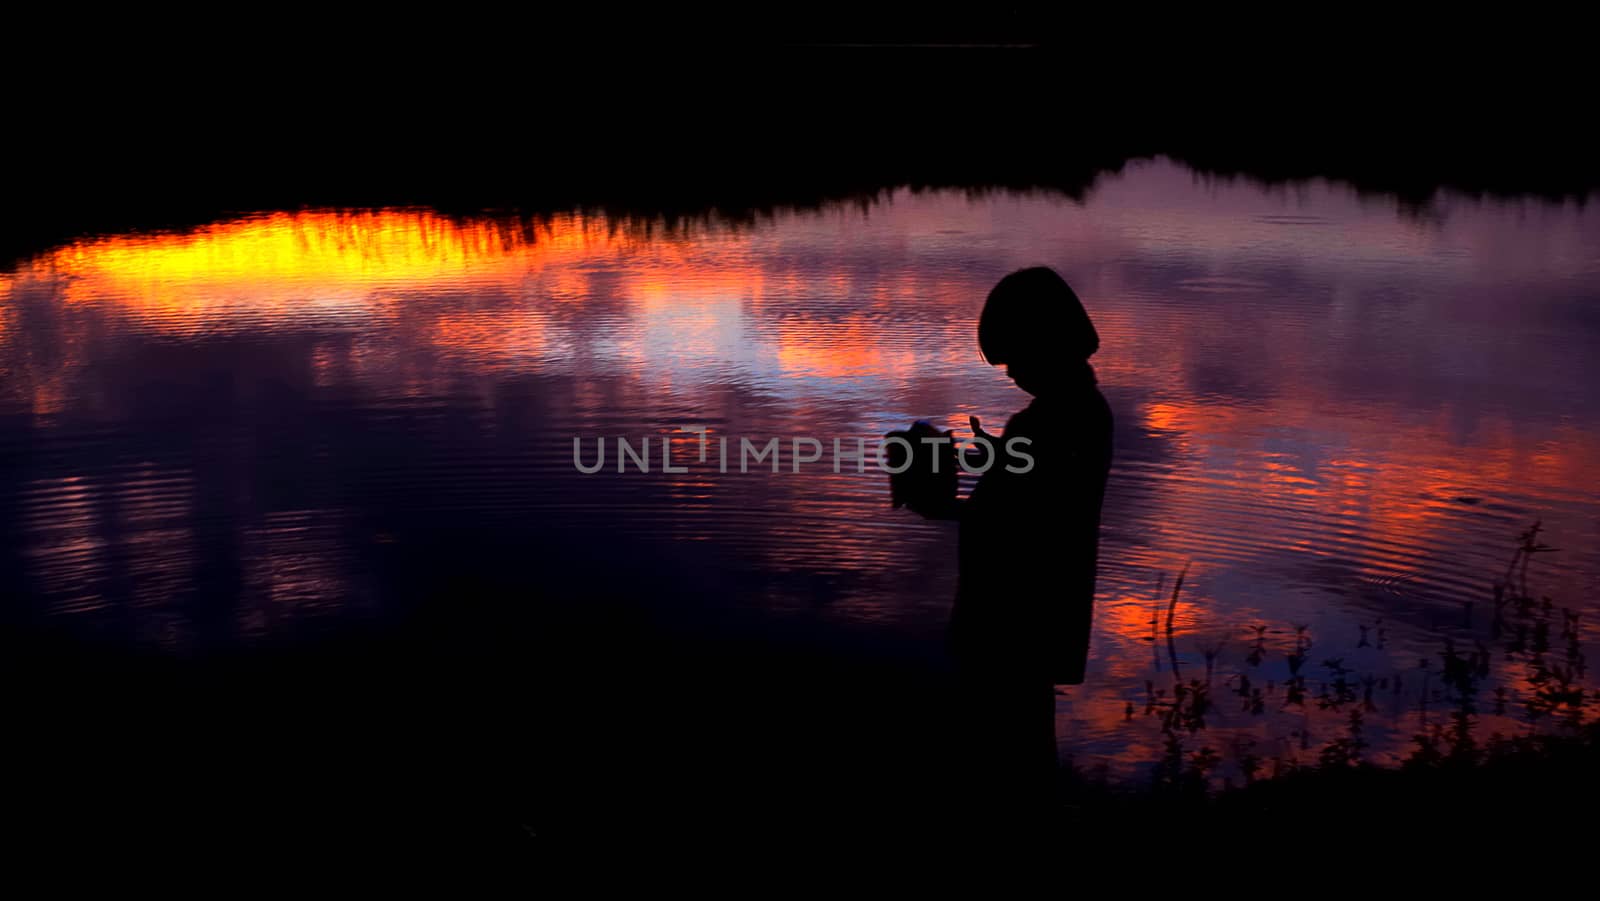 Silhouette of child beside the swamp with sunset sky reflected